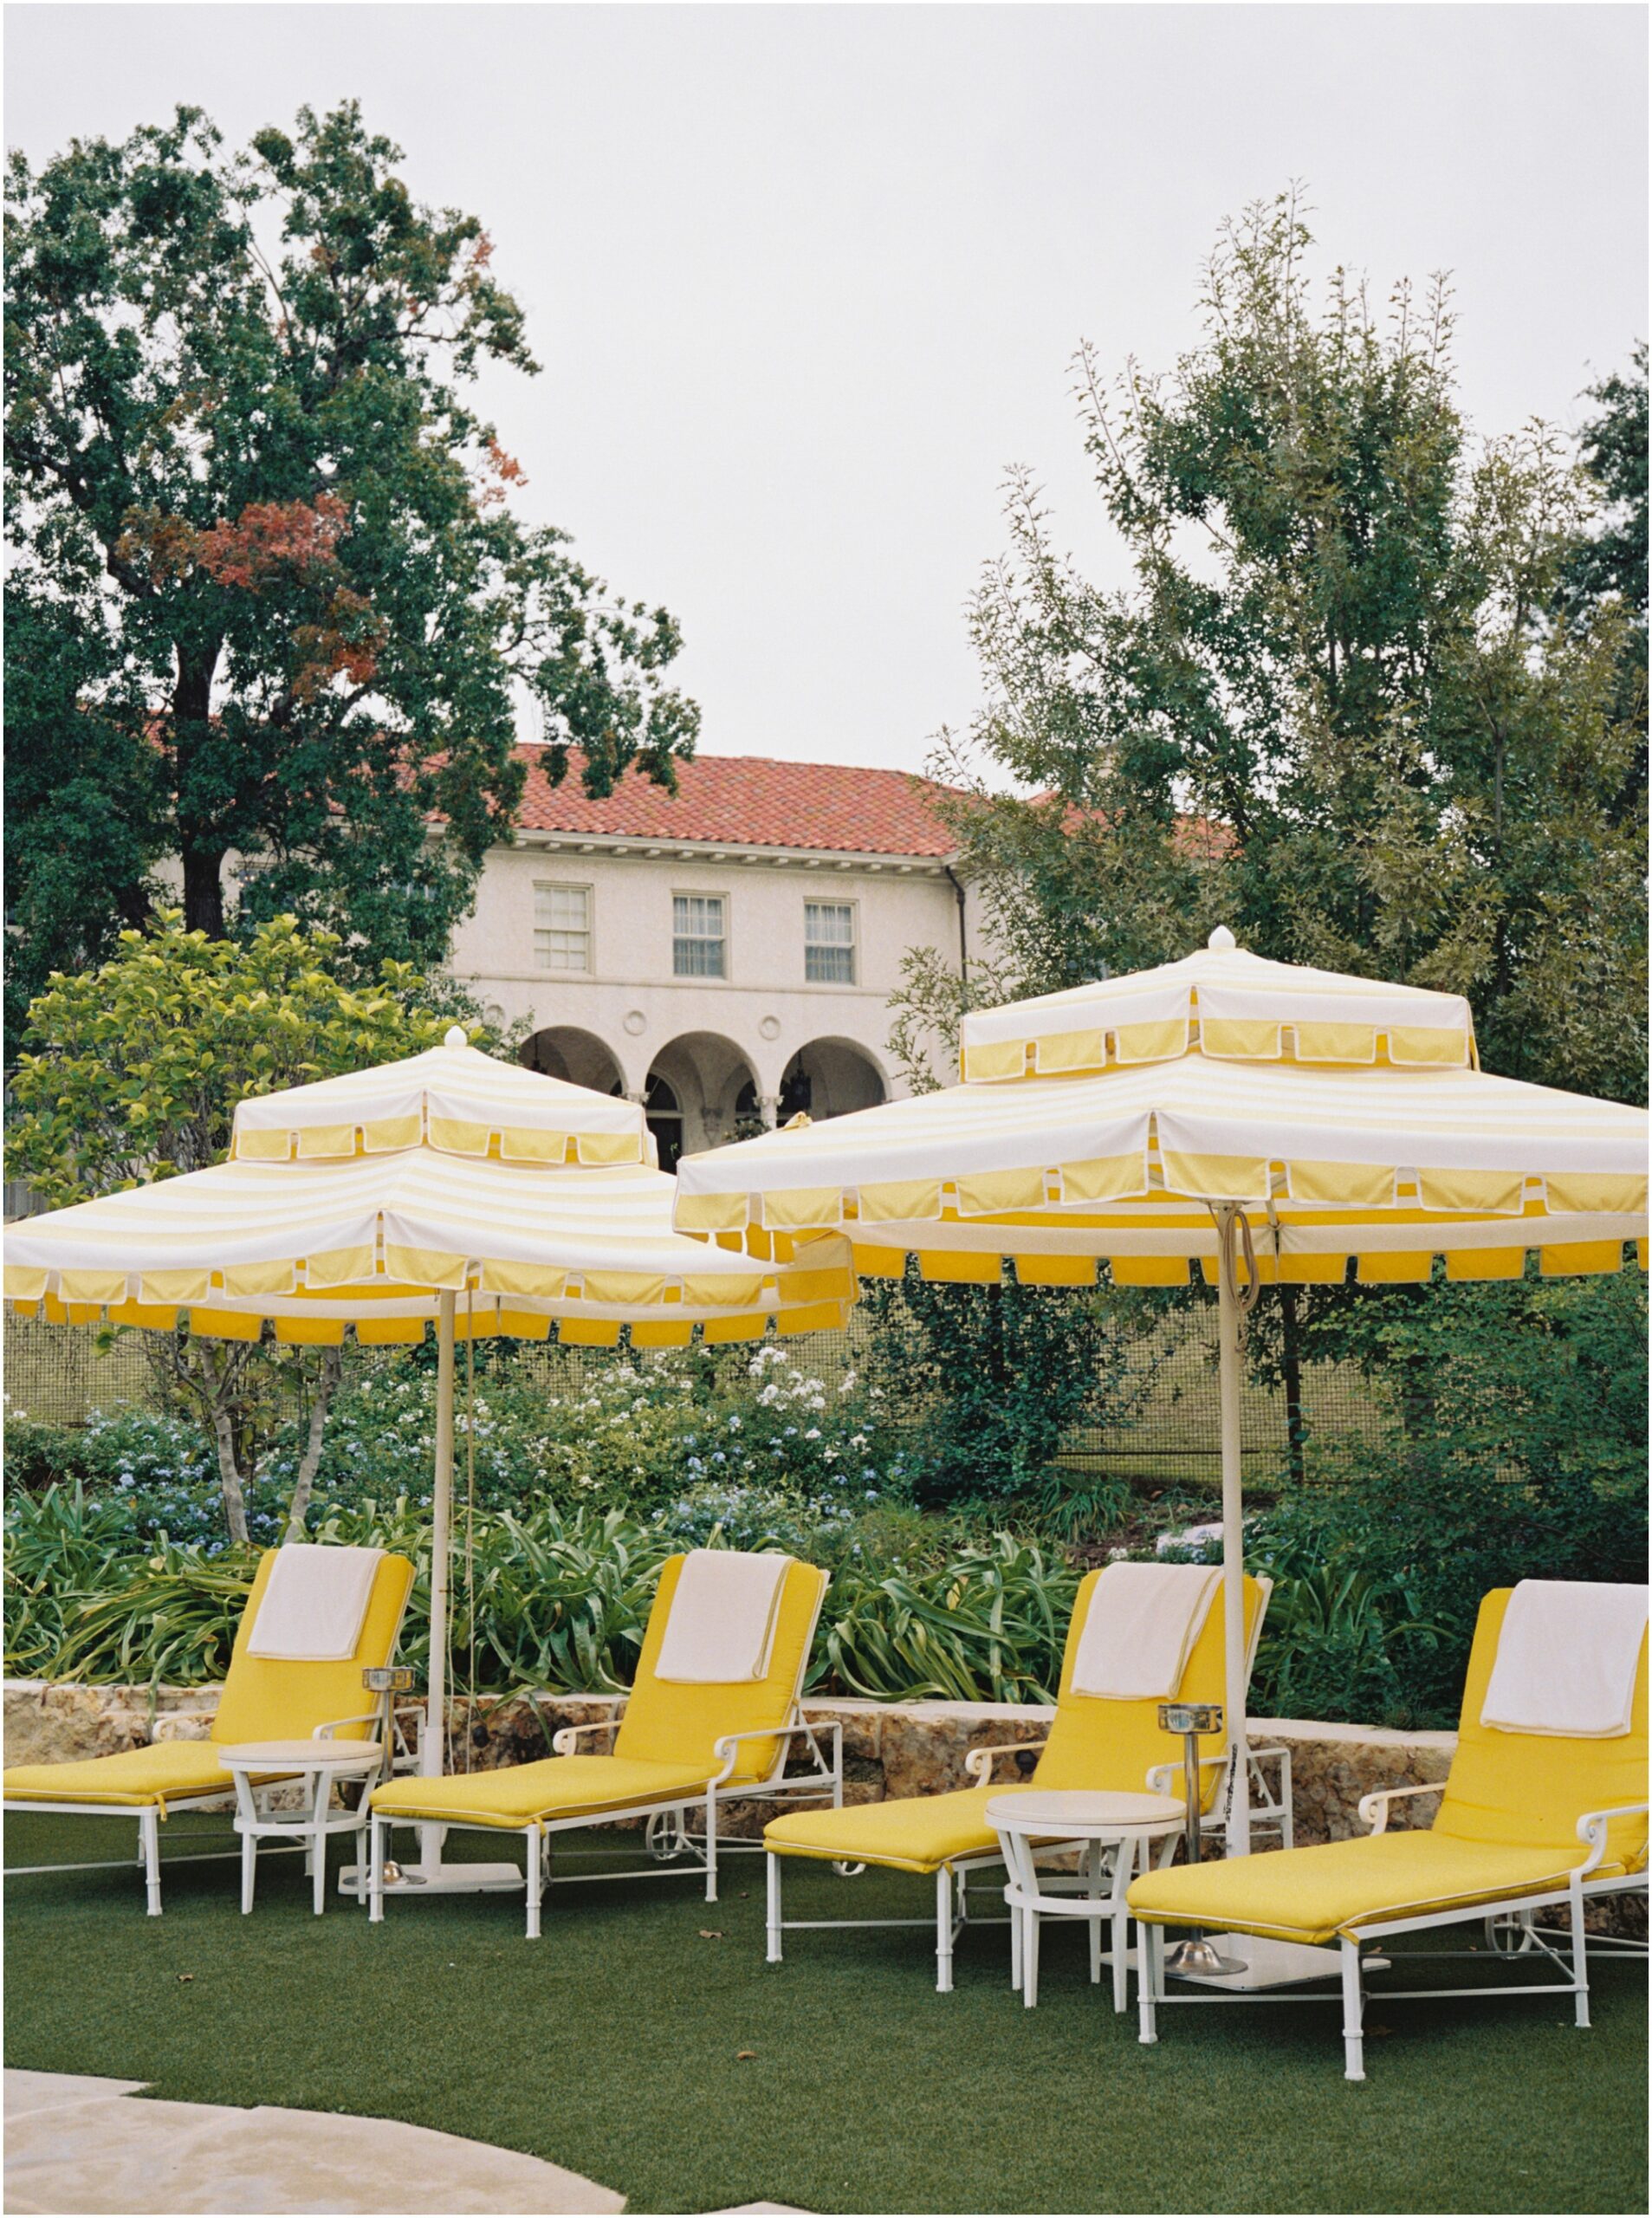 commodore perry estate in Austin, Texas wedding on 120mm film with yellow umbrellas